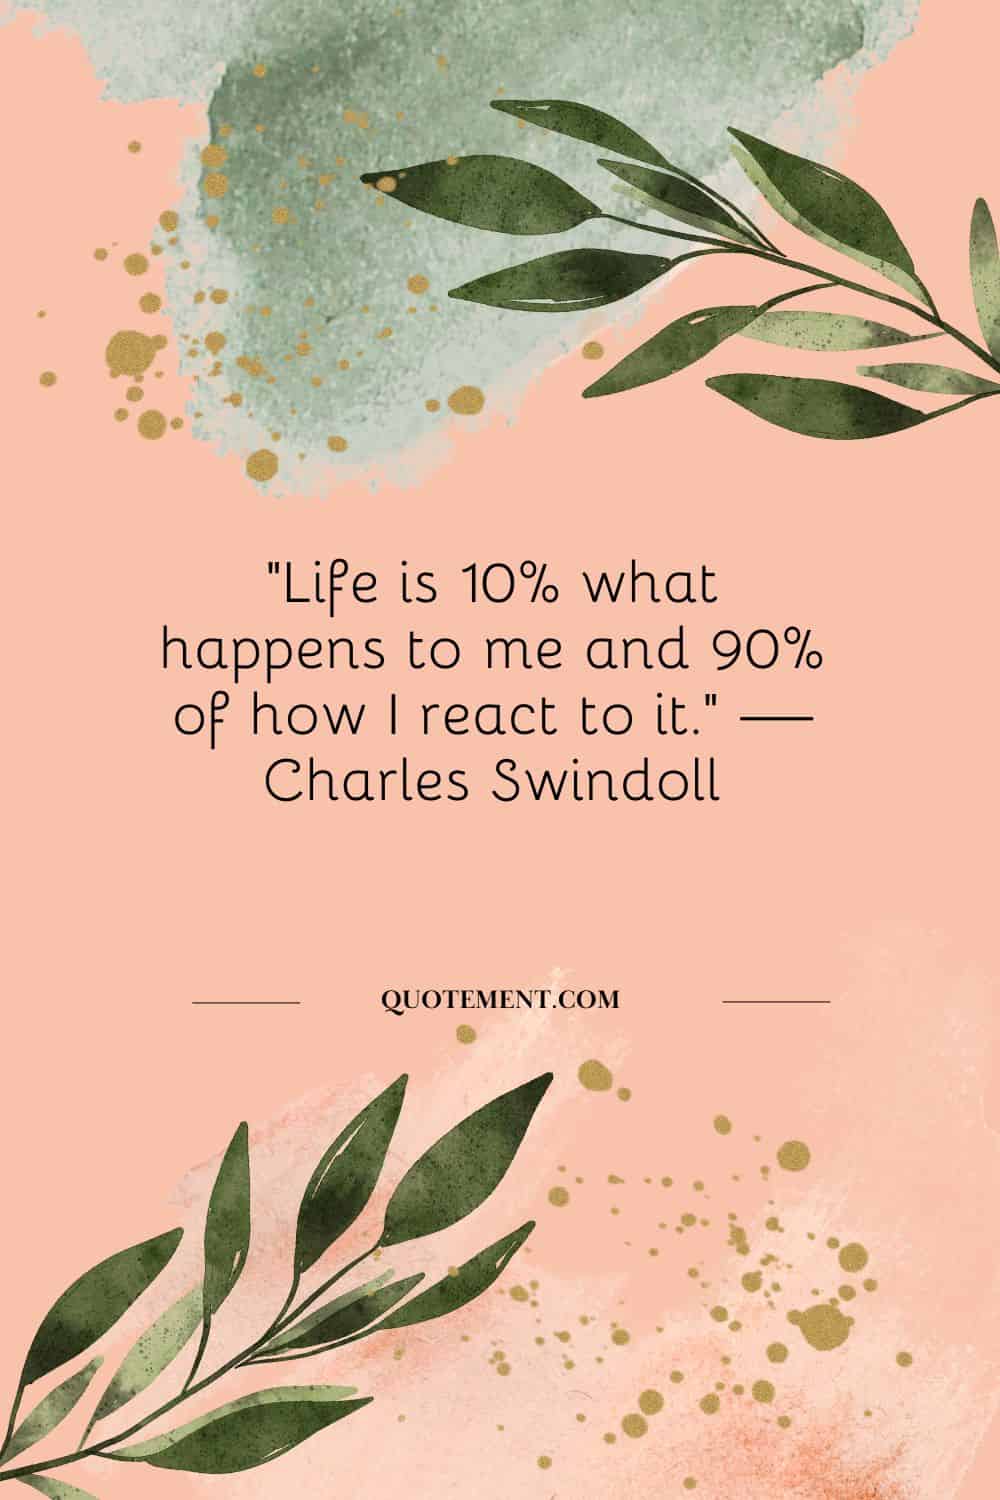 “Life is 10% what happens to me and 90% of how I react to it.” — Charles Swindoll